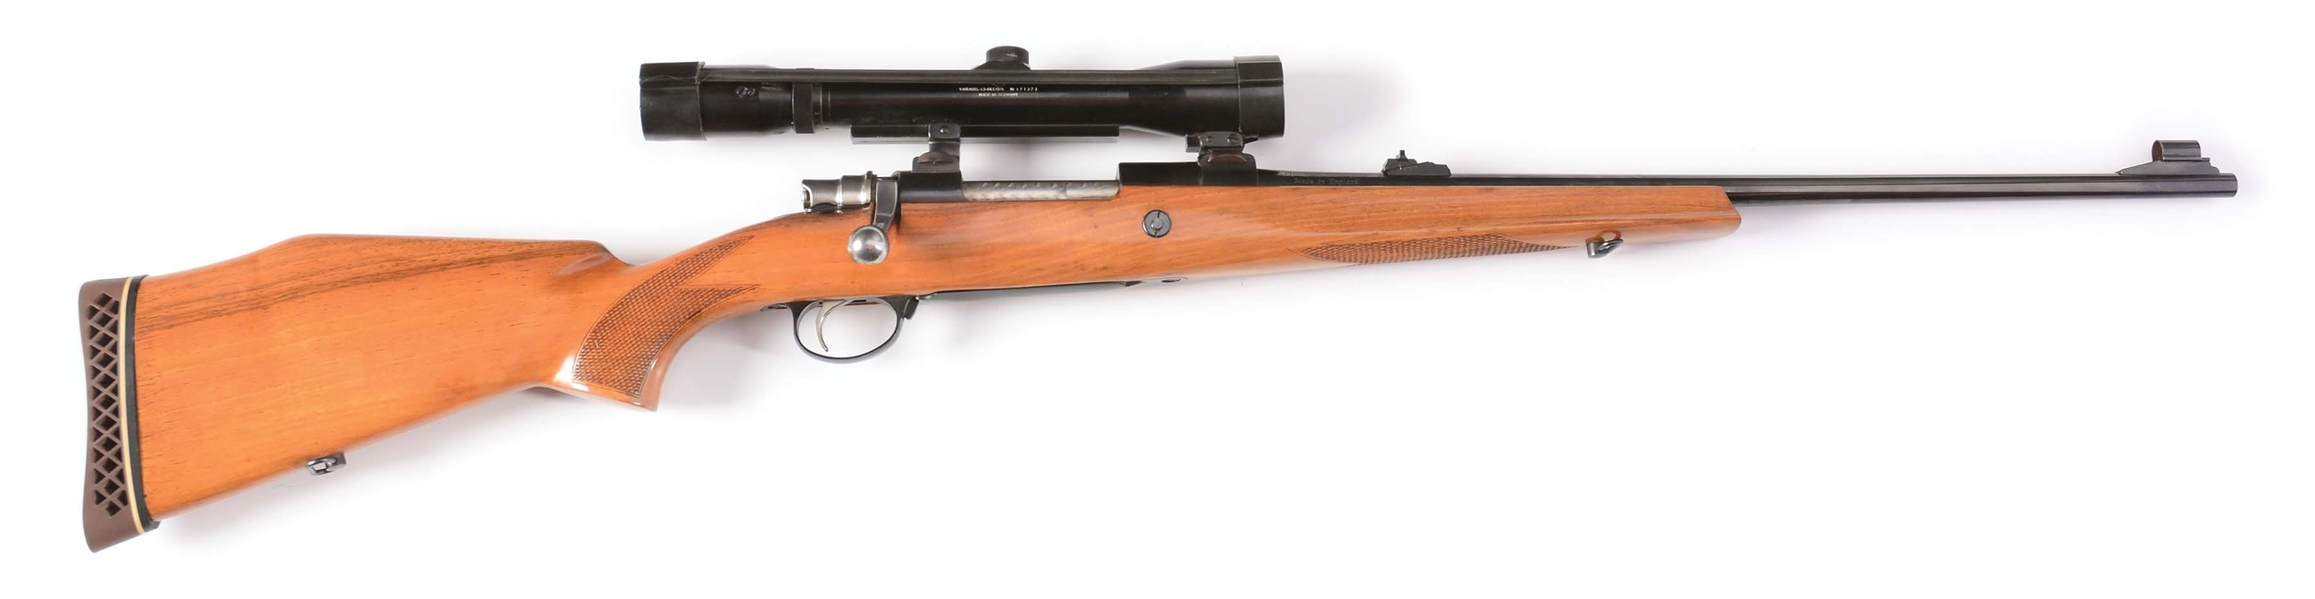 (C) ALPINE FIREARMS CO. ENGLISH CUSTOM BOLT ACTION MAUSER SPORTING RIFLE WITH SCOPE.